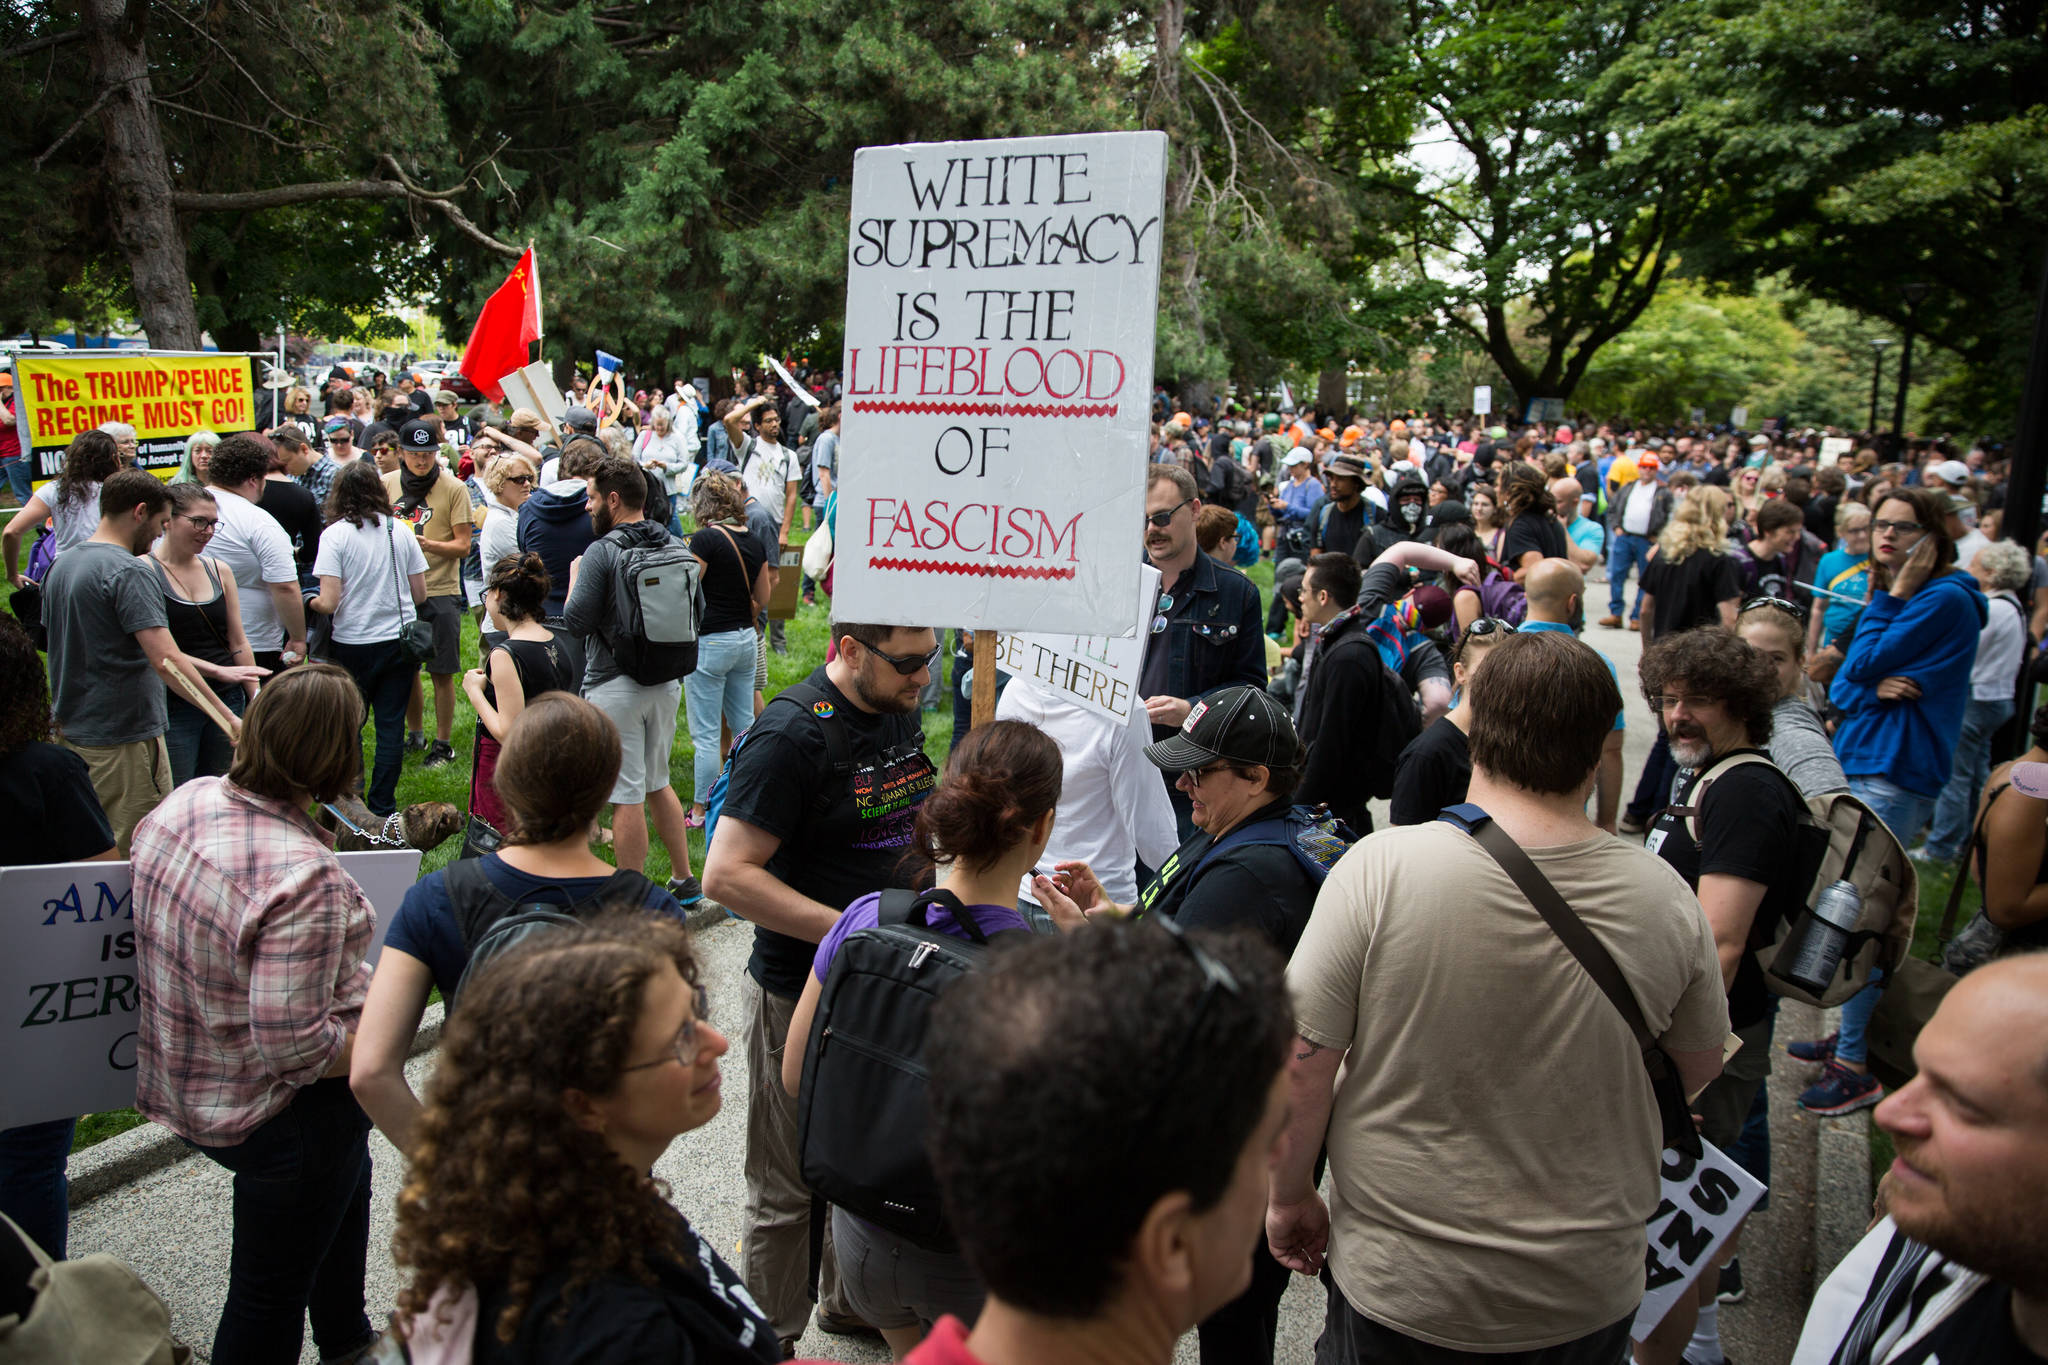 Counter-Protesters Face Off Against Far Right in Tense Rally